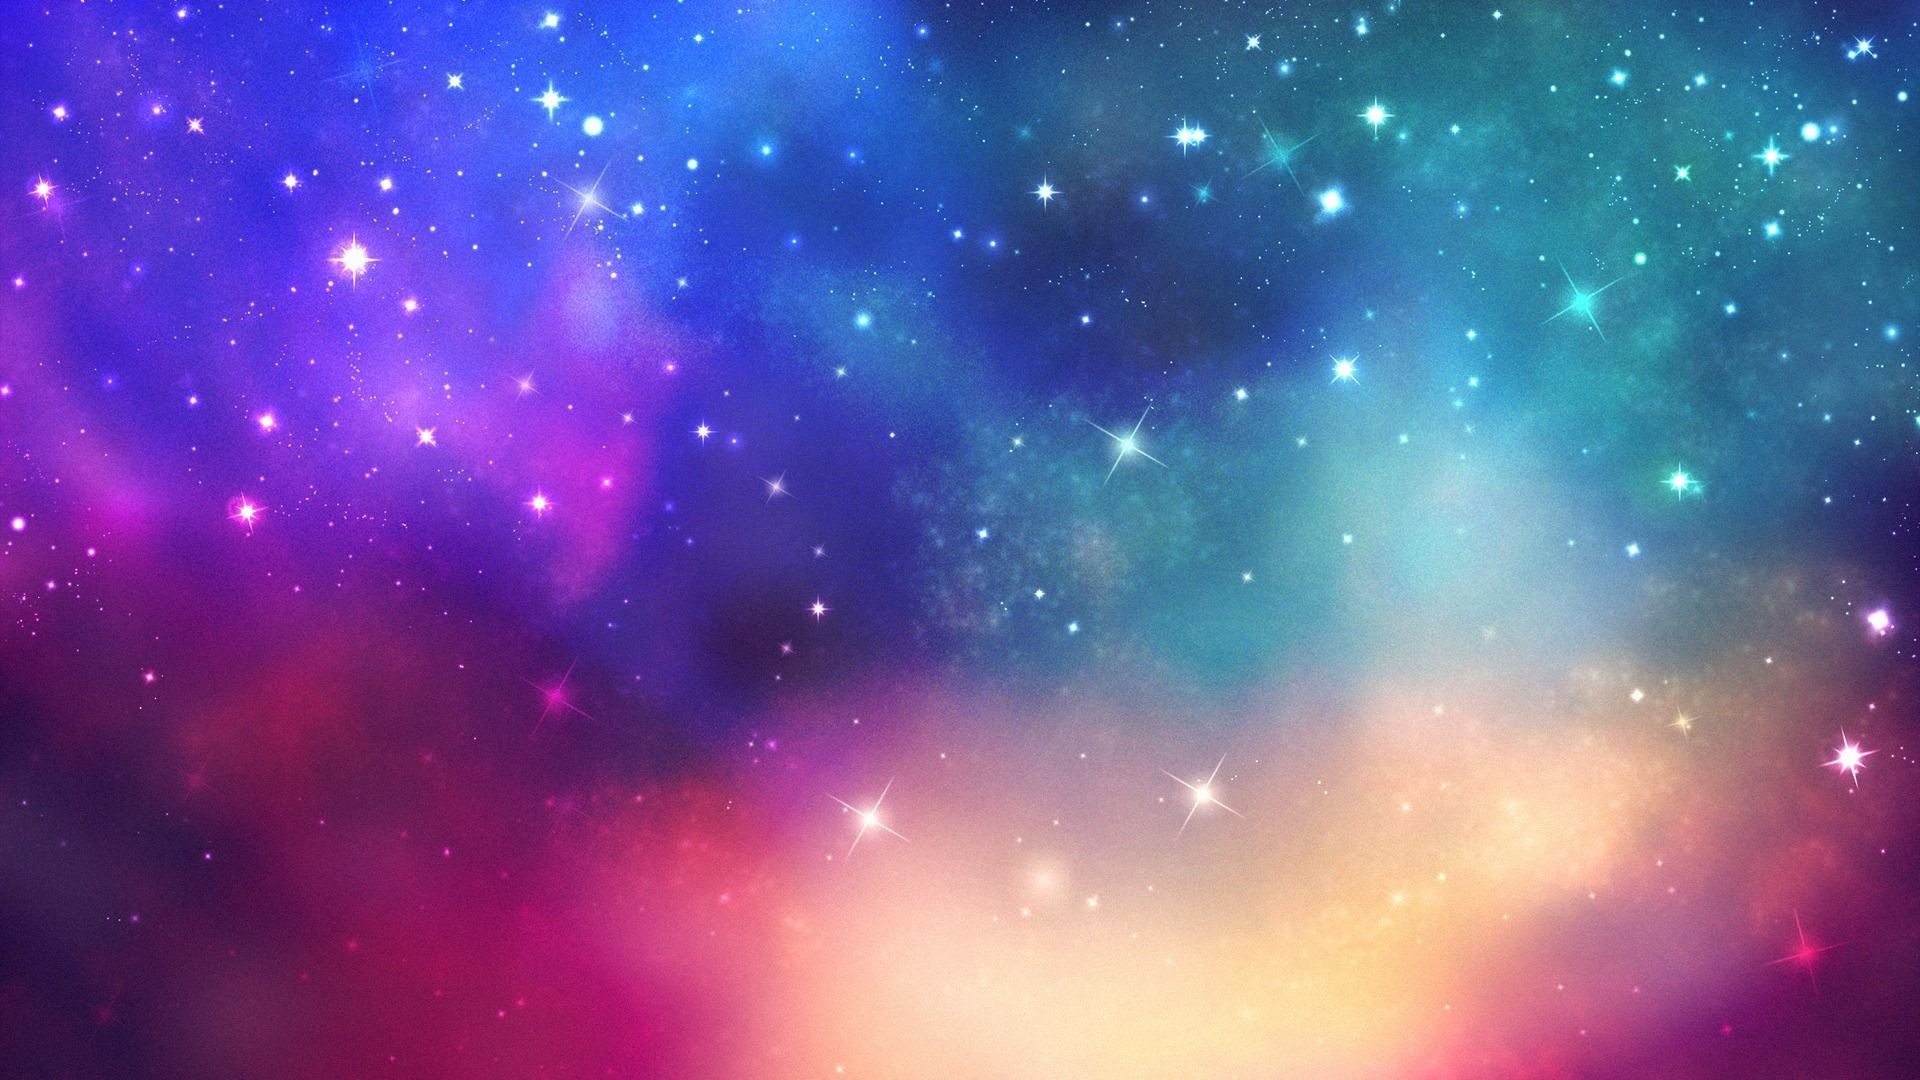 1920x1080 Tumblr Backgrounds Galaxy Star (page 4) - Pics about space